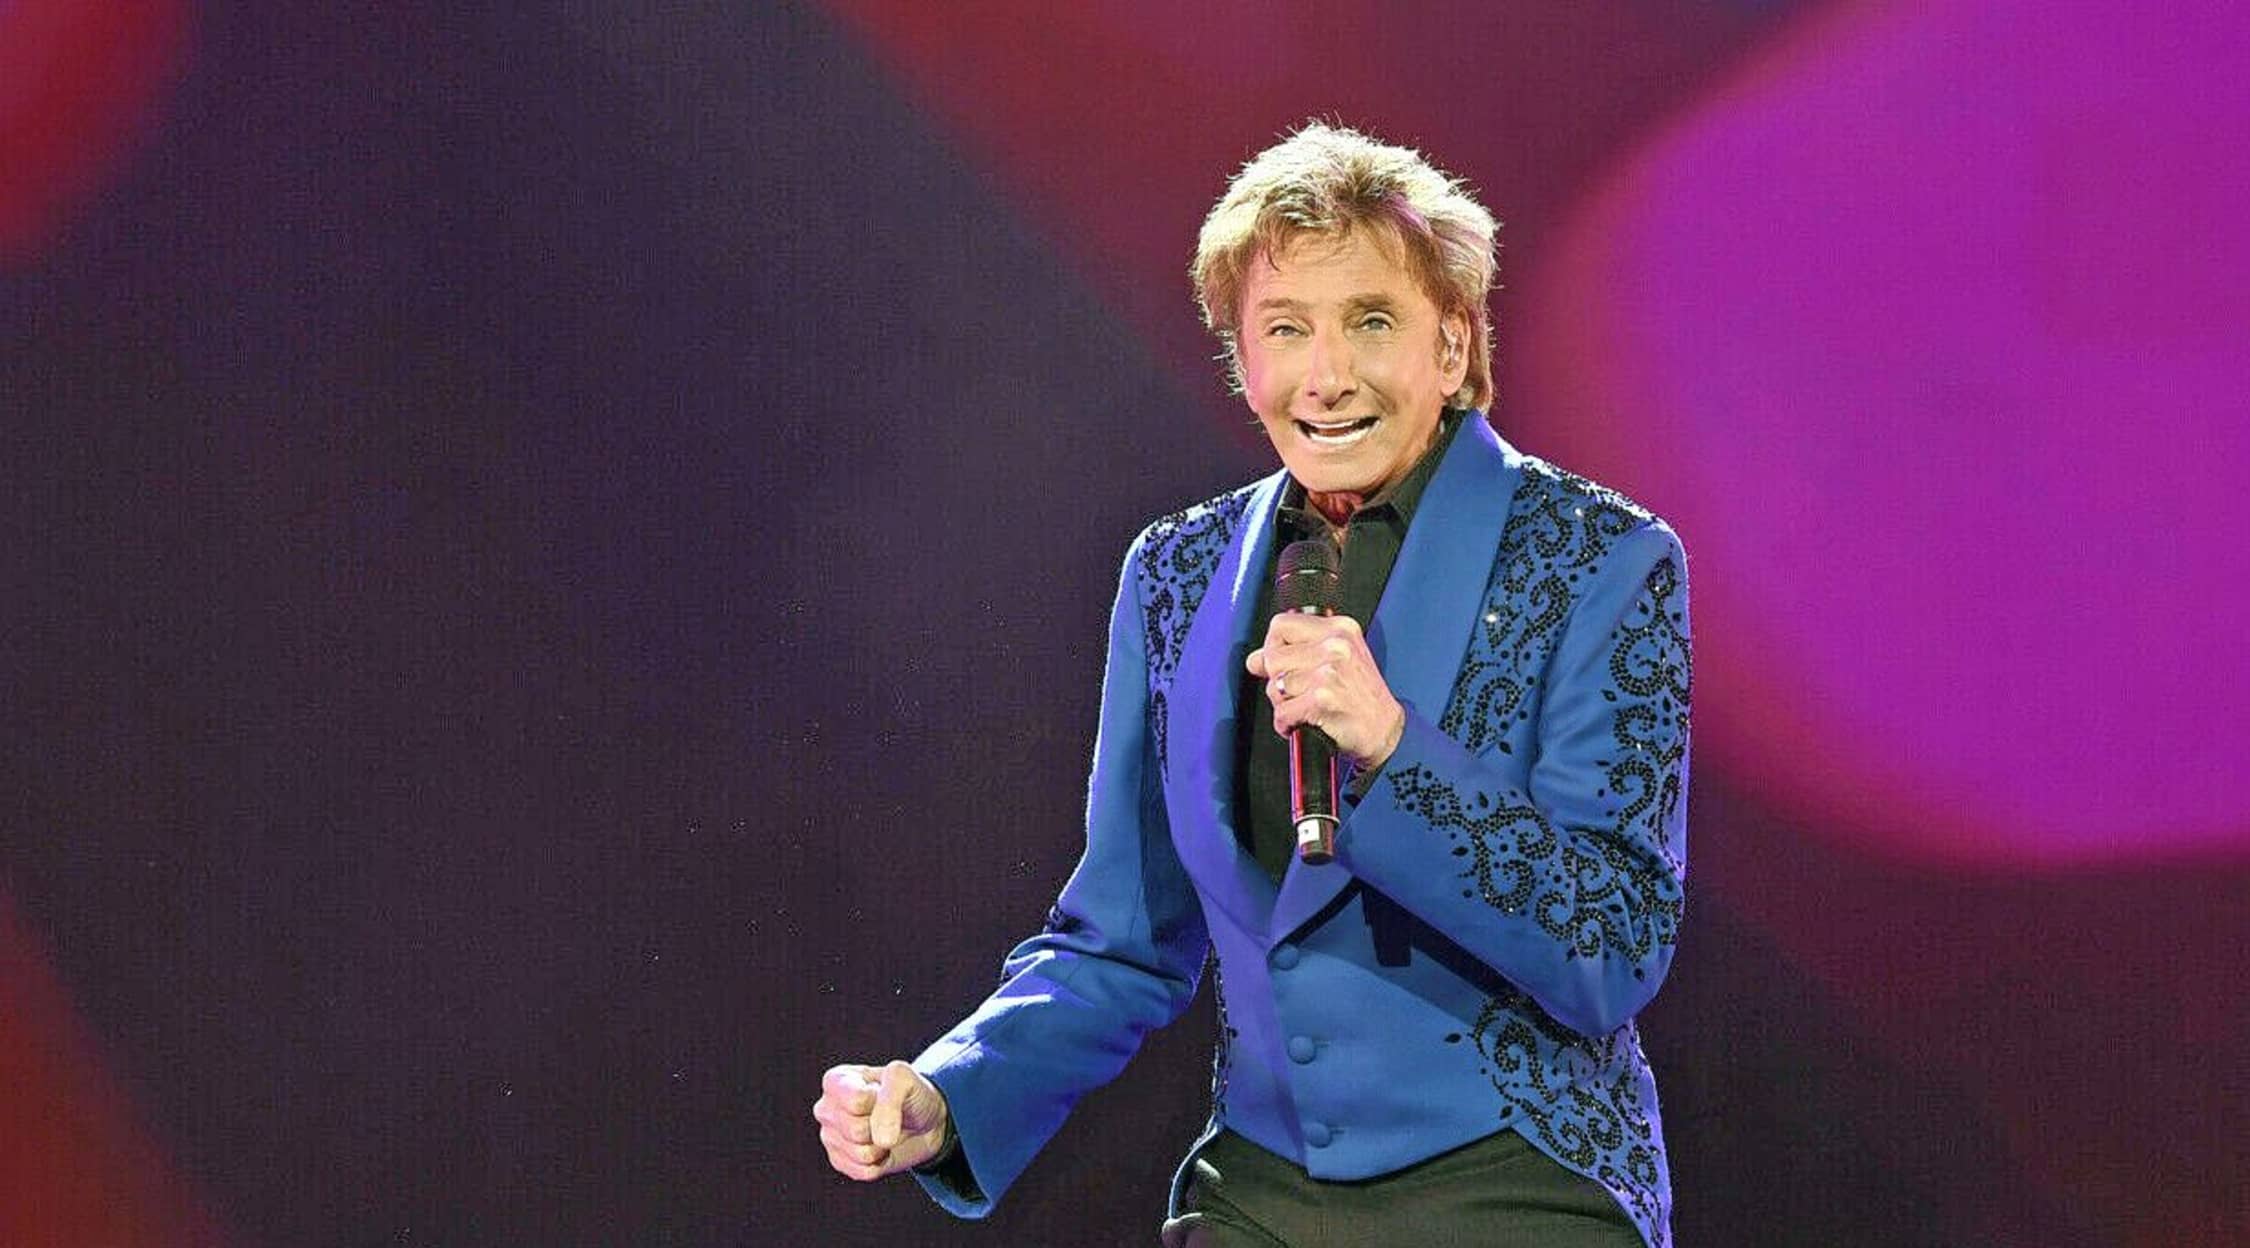 Barry Manilow Now 2020 Barry Manilow Facts Singer S Age Husband Net